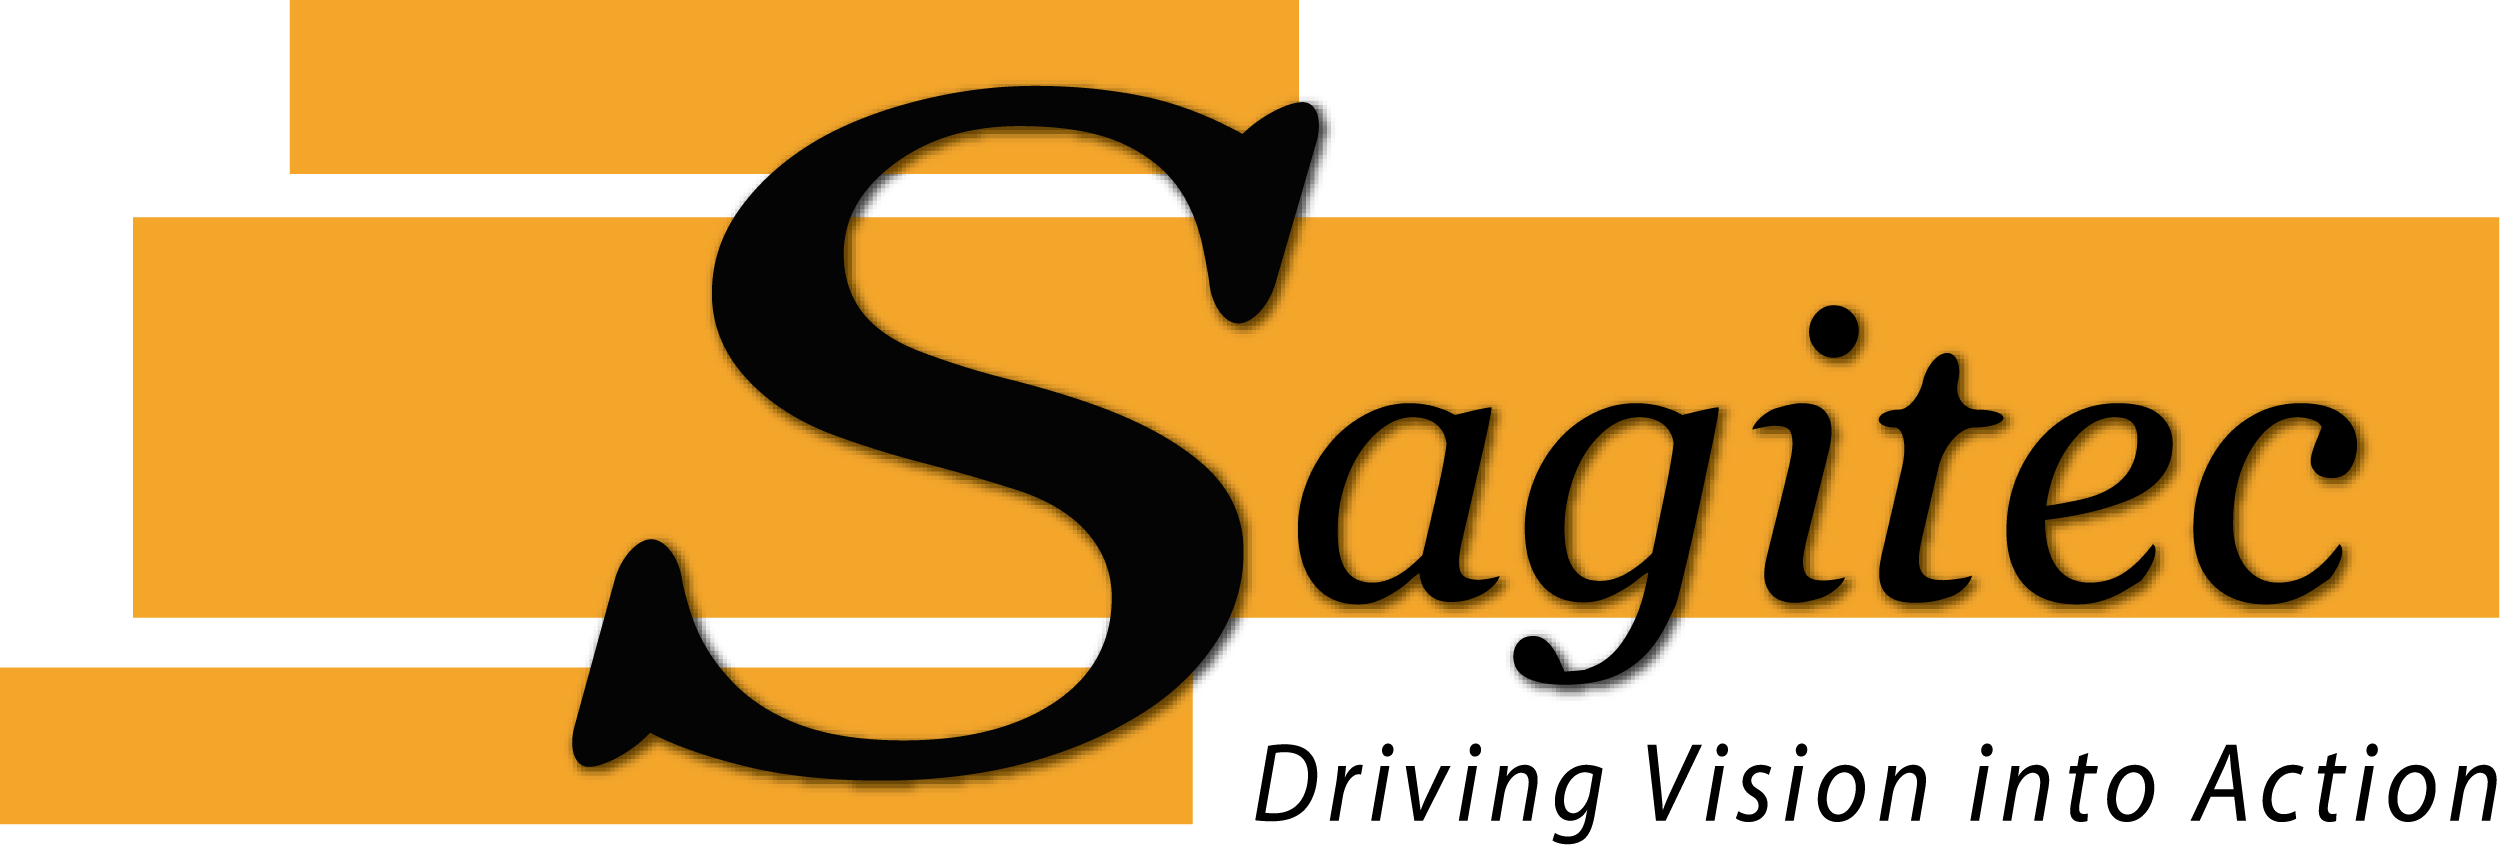 sagitec-is-helping-their-employees-realize-the-benefits-of-yoga